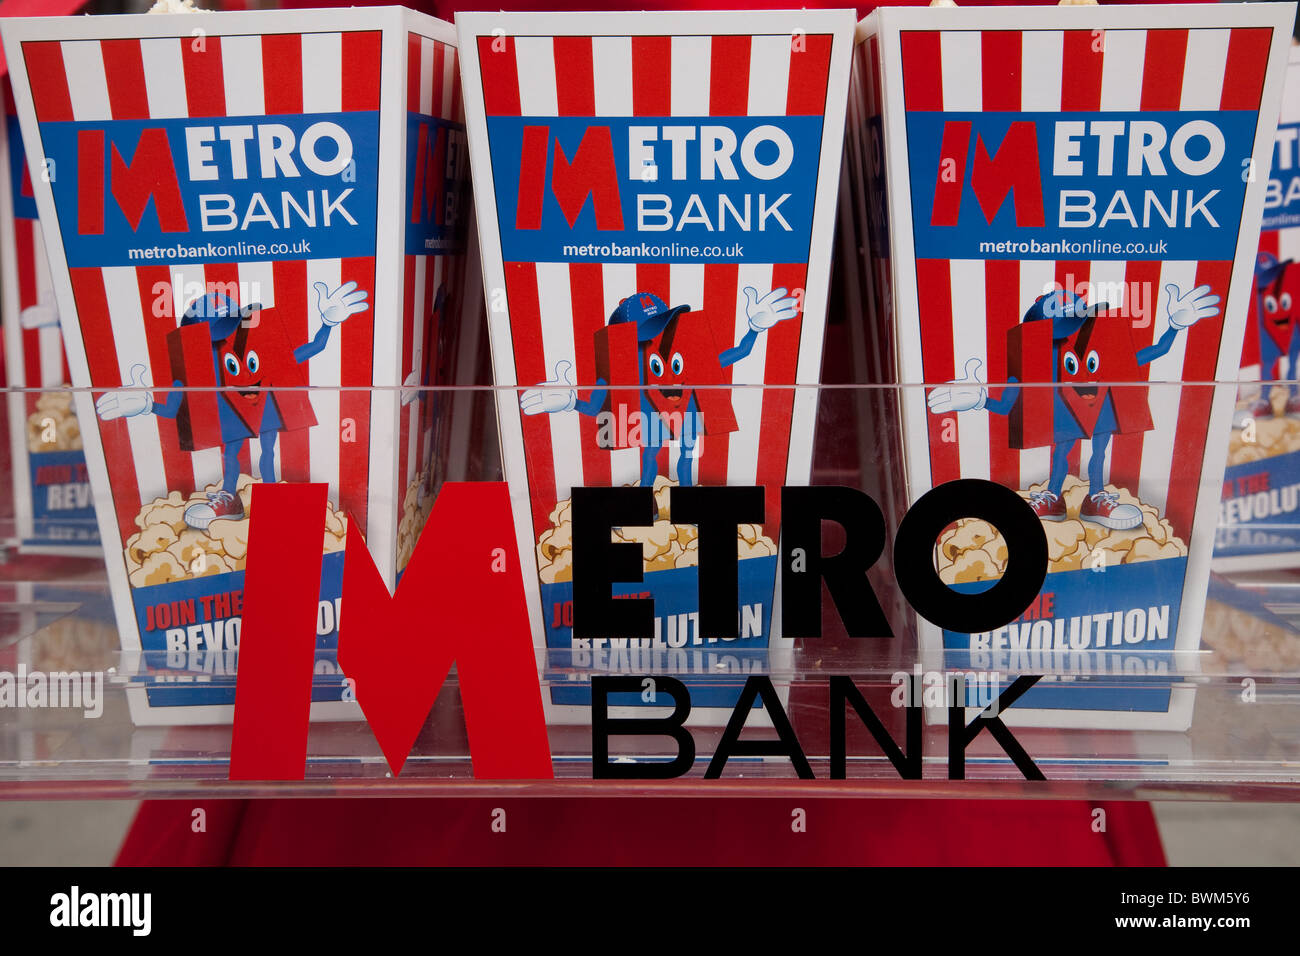 Metro Bank, Britain's first new high street bank in over 100 years opens in Earl's Court, London, UK Stock Photo